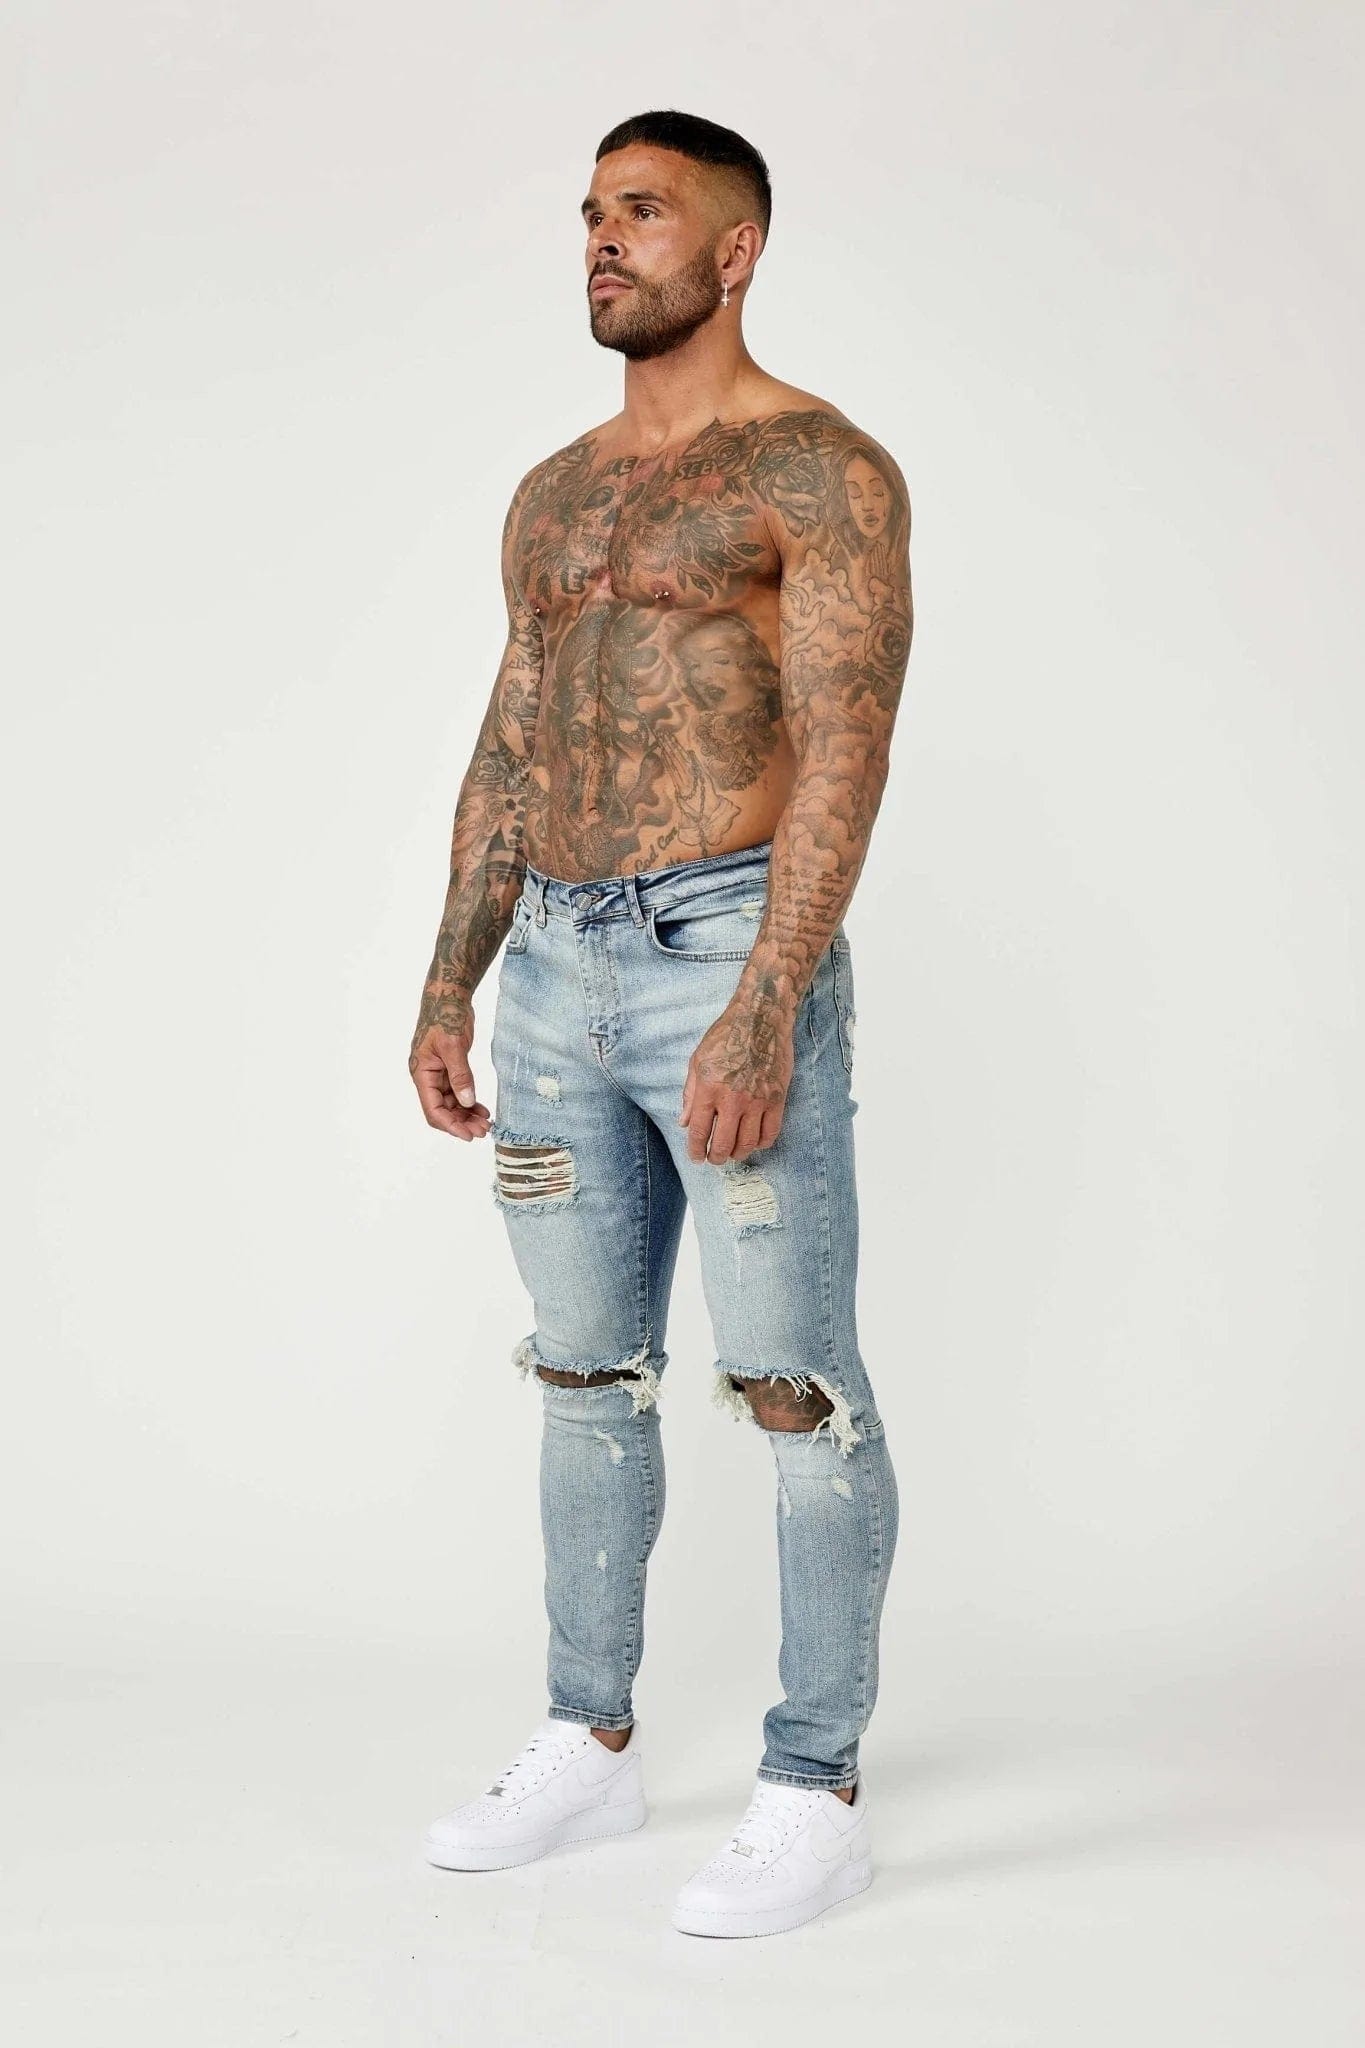 Legend London Jeans SKINNY FIT JEANS - MID BLUE RIPPED &amp; REPAIRED